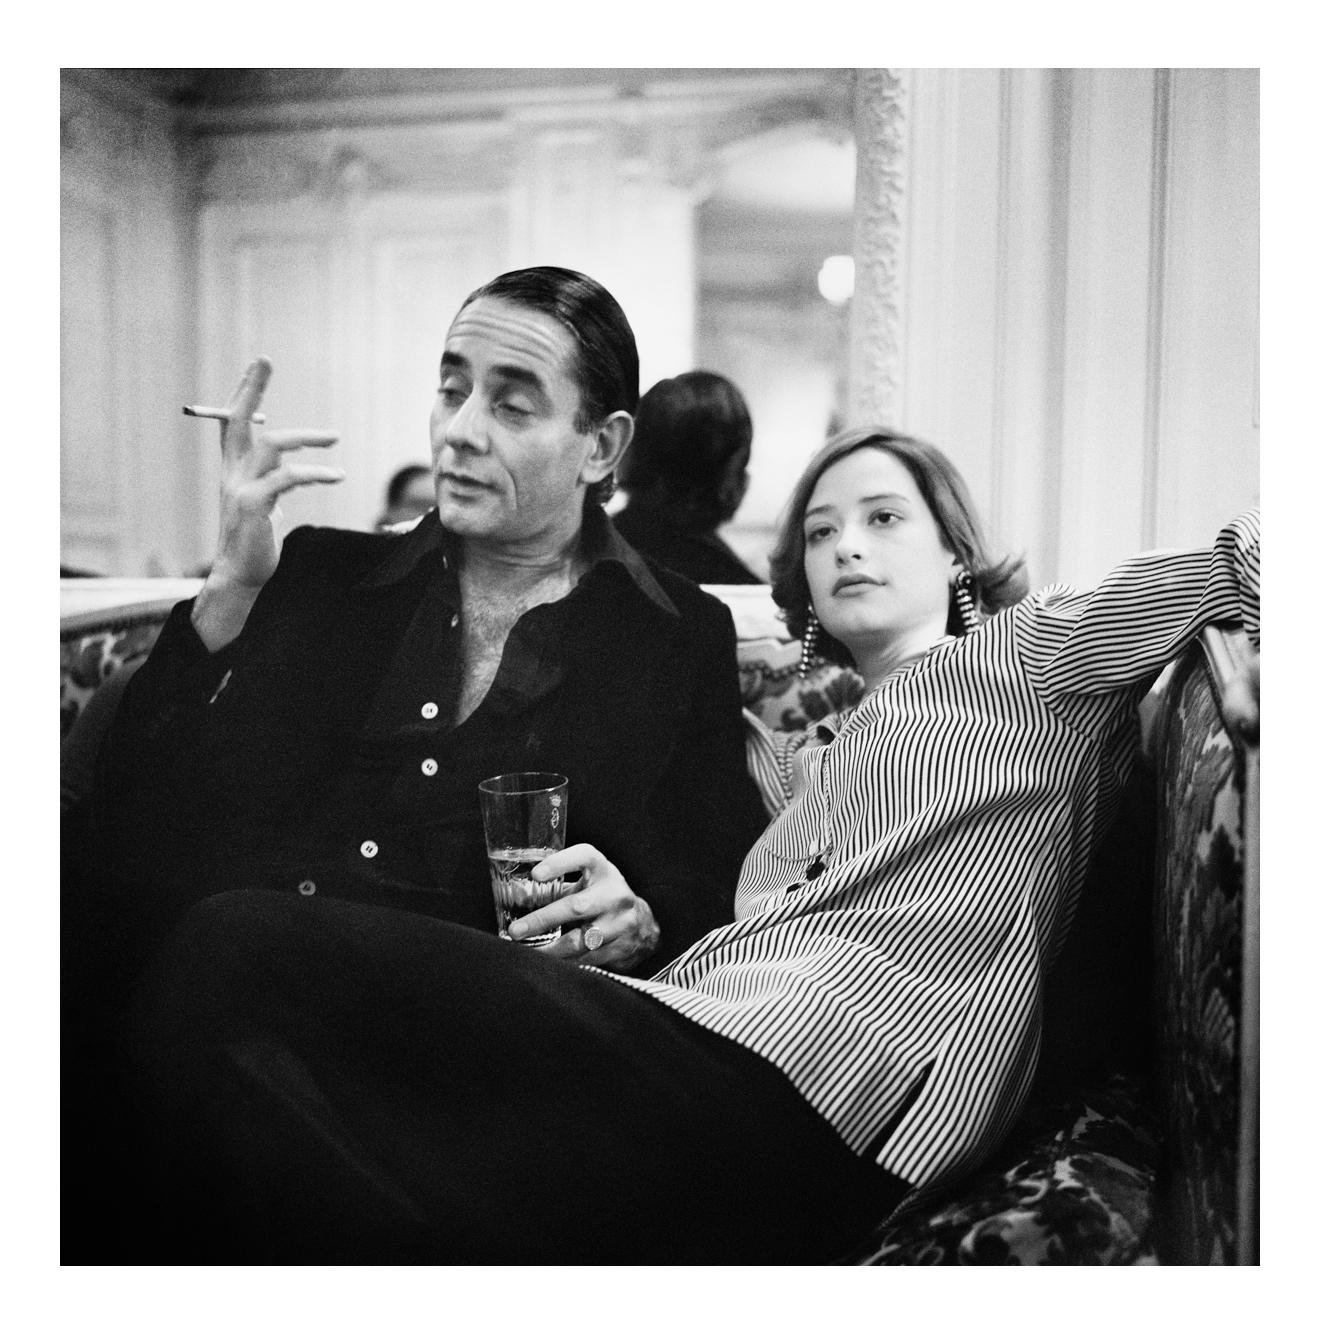 Jonathan Becker Black and White Photograph - Kenny Jay Lane and Nicky Weymouth at the Hotel de Crillon, Paris, February 1975